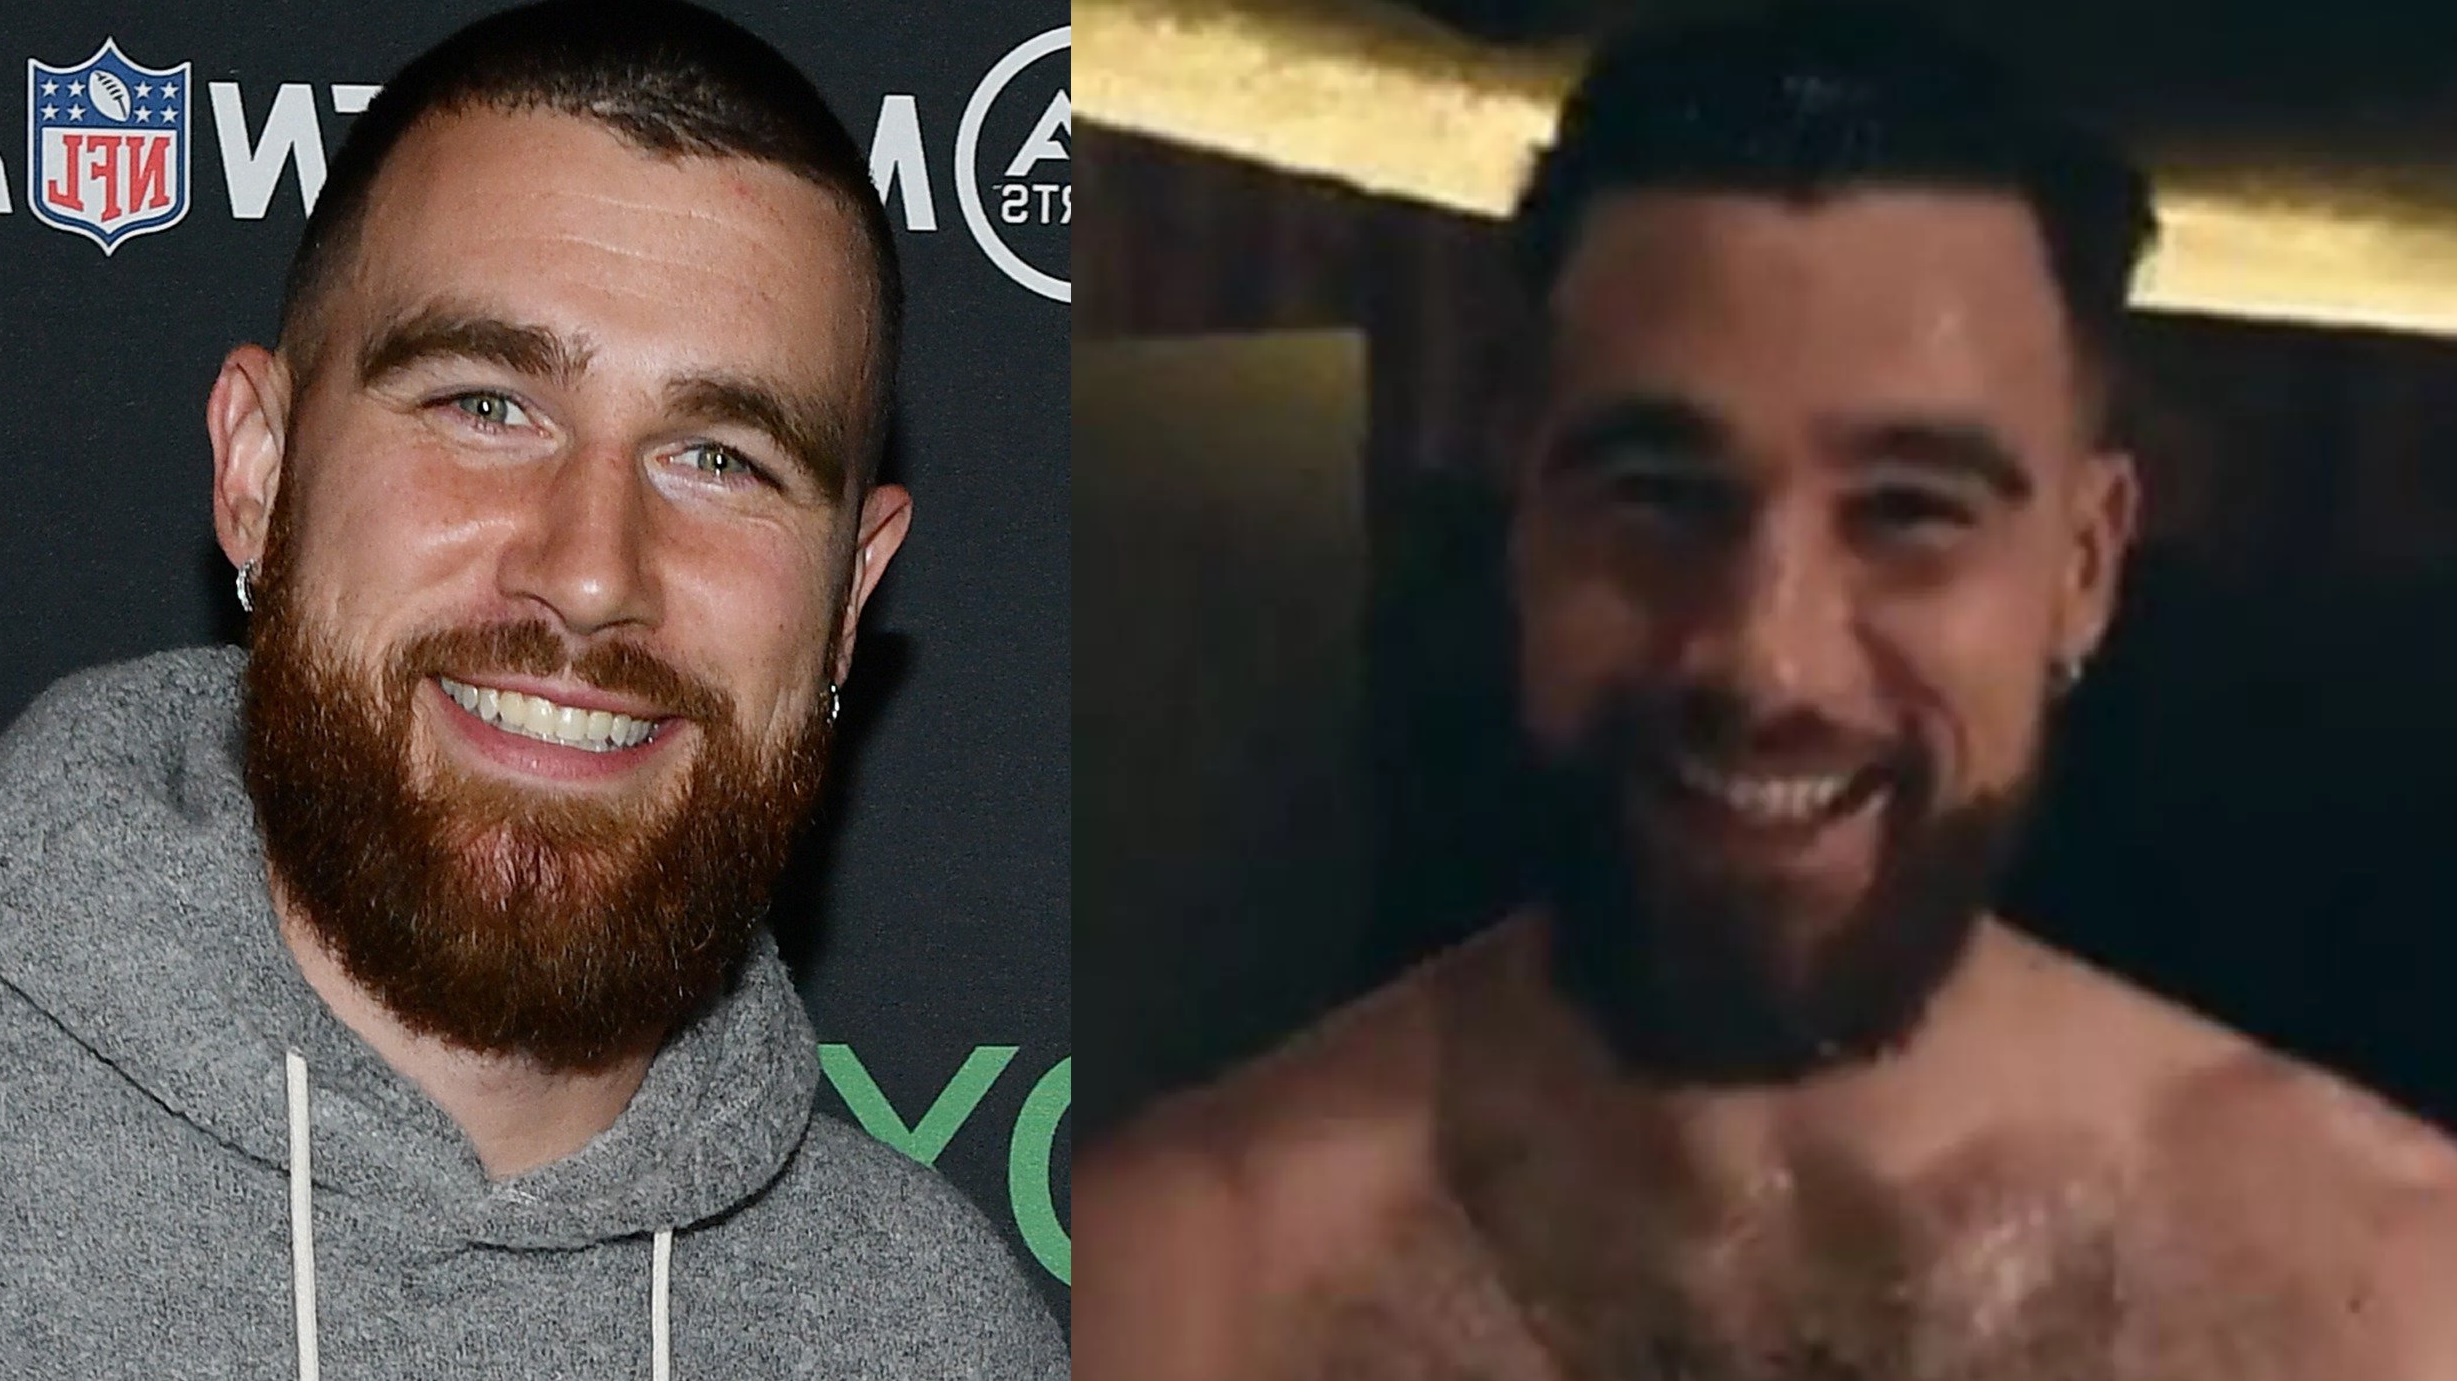 Travis Kelce earns a LEGION of new admirers after video of him walking around shirtless in nothing but a towel is circulated on social media - leaving thirsty fans in a frenzy